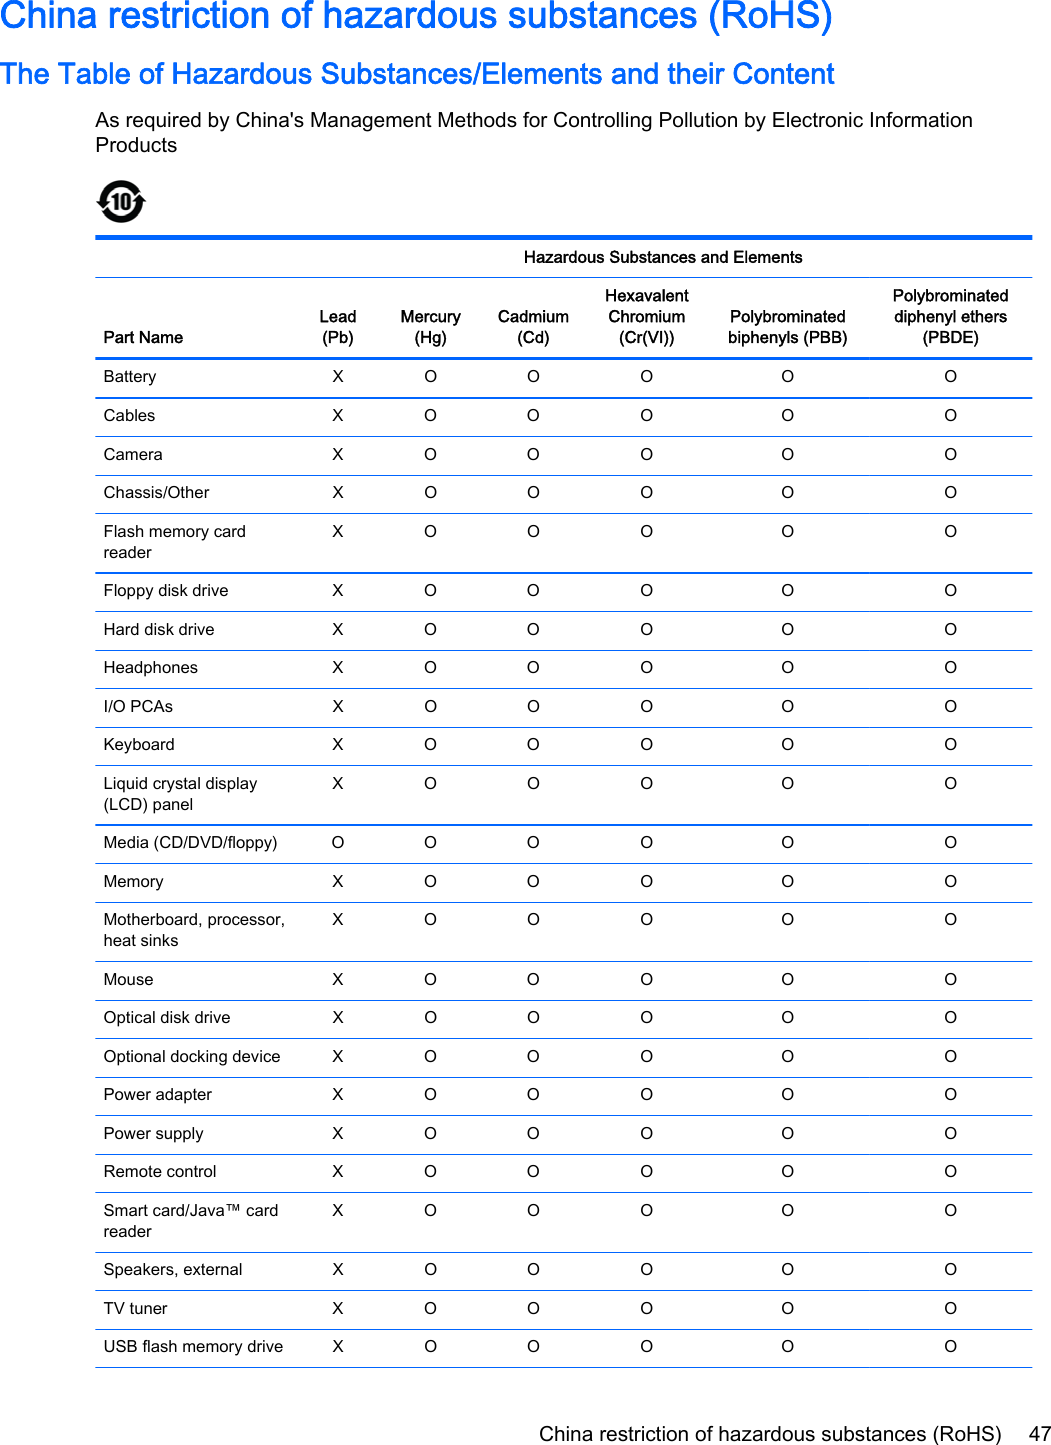 China restriction of hazardous substances (RoHS)The Table of Hazardous Substances/Elements and their ContentAs required by China&apos;s Management Methods for Controlling Pollution by Electronic InformationProducts  Hazardous Substances and ElementsPart NameLead(Pb)Mercury(Hg)Cadmium(Cd)HexavalentChromium(Cr(VI))Polybrominatedbiphenyls (PBB)Polybrominateddiphenyl ethers(PBDE)Battery X O O O O OCables X O O O O OCamera X O O O O OChassis/Other X O O O O OFlash memory cardreaderXO O O O OFloppy disk drive X O O O O OHard disk drive X O O O O OHeadphones X O O O O OI/O PCAs X O O O O OKeyboard X O O O O OLiquid crystal display(LCD) panelXO O O O OMedia (CD/DVD/floppy) O O O O O OMemory X O O O O OMotherboard, processor,heat sinksXO O O O OMouse X O O O O OOptical disk drive X O O O O OOptional docking device X O O O O OPower adapter X O O O O OPower supply X O O O O ORemote control X O O O O OSmart card/Java™ cardreaderXO O O O OSpeakers, external X O O O O OTV tuner X O O O O OUSB flash memory drive X O O O O OChina restriction of hazardous substances (RoHS) 47